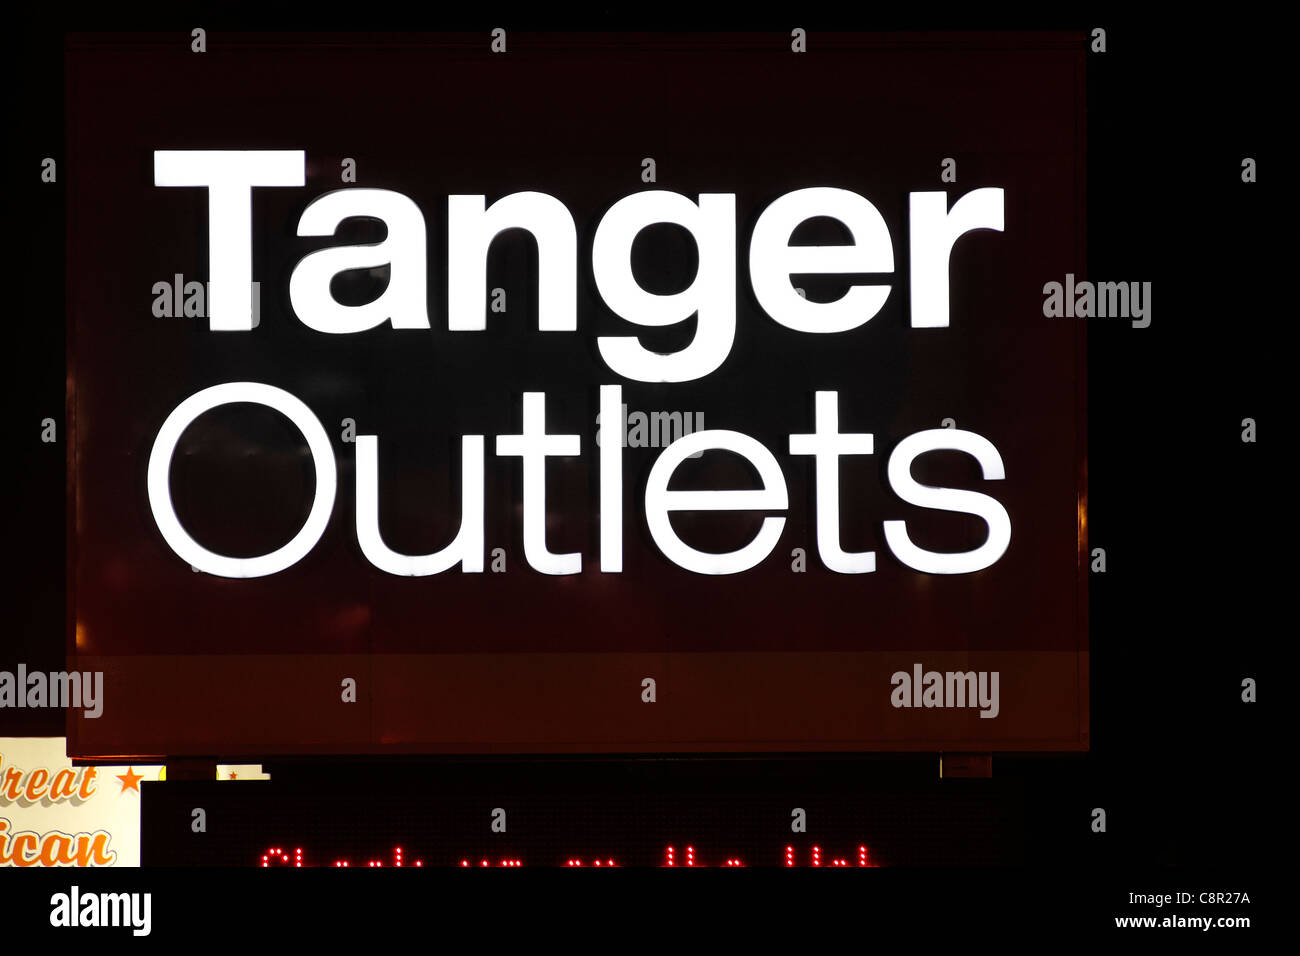 Tanger Outlets sign at night Stock Photo